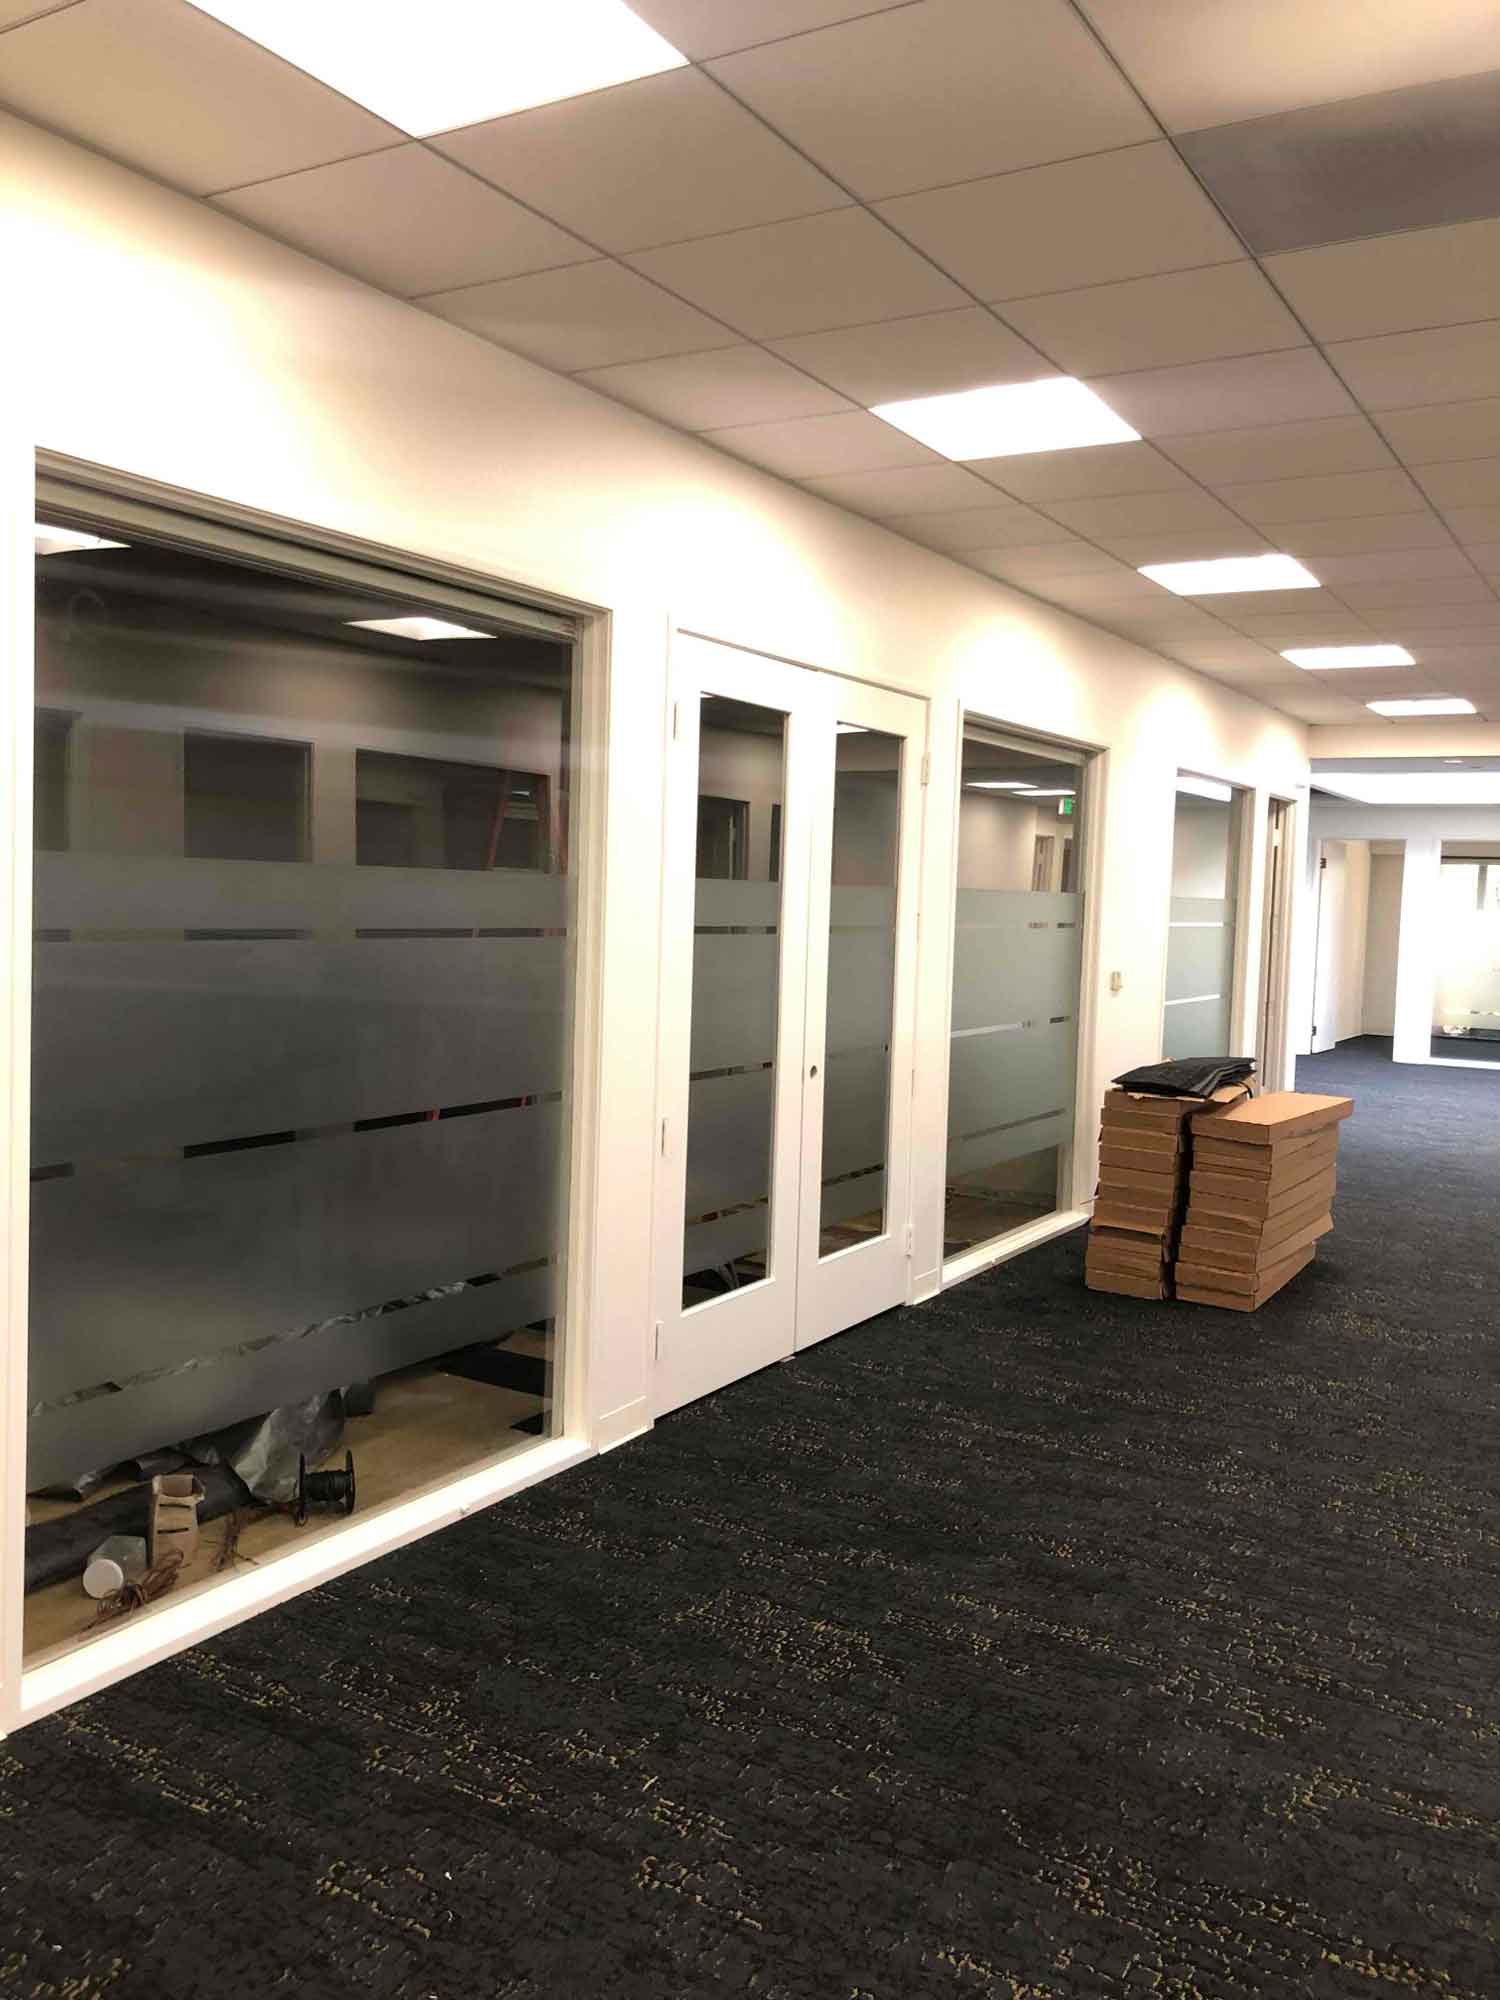 This office in Windsor, CA had the ClimatePro team install 3M Fasara Oslo decorative film on the interior windows and doors